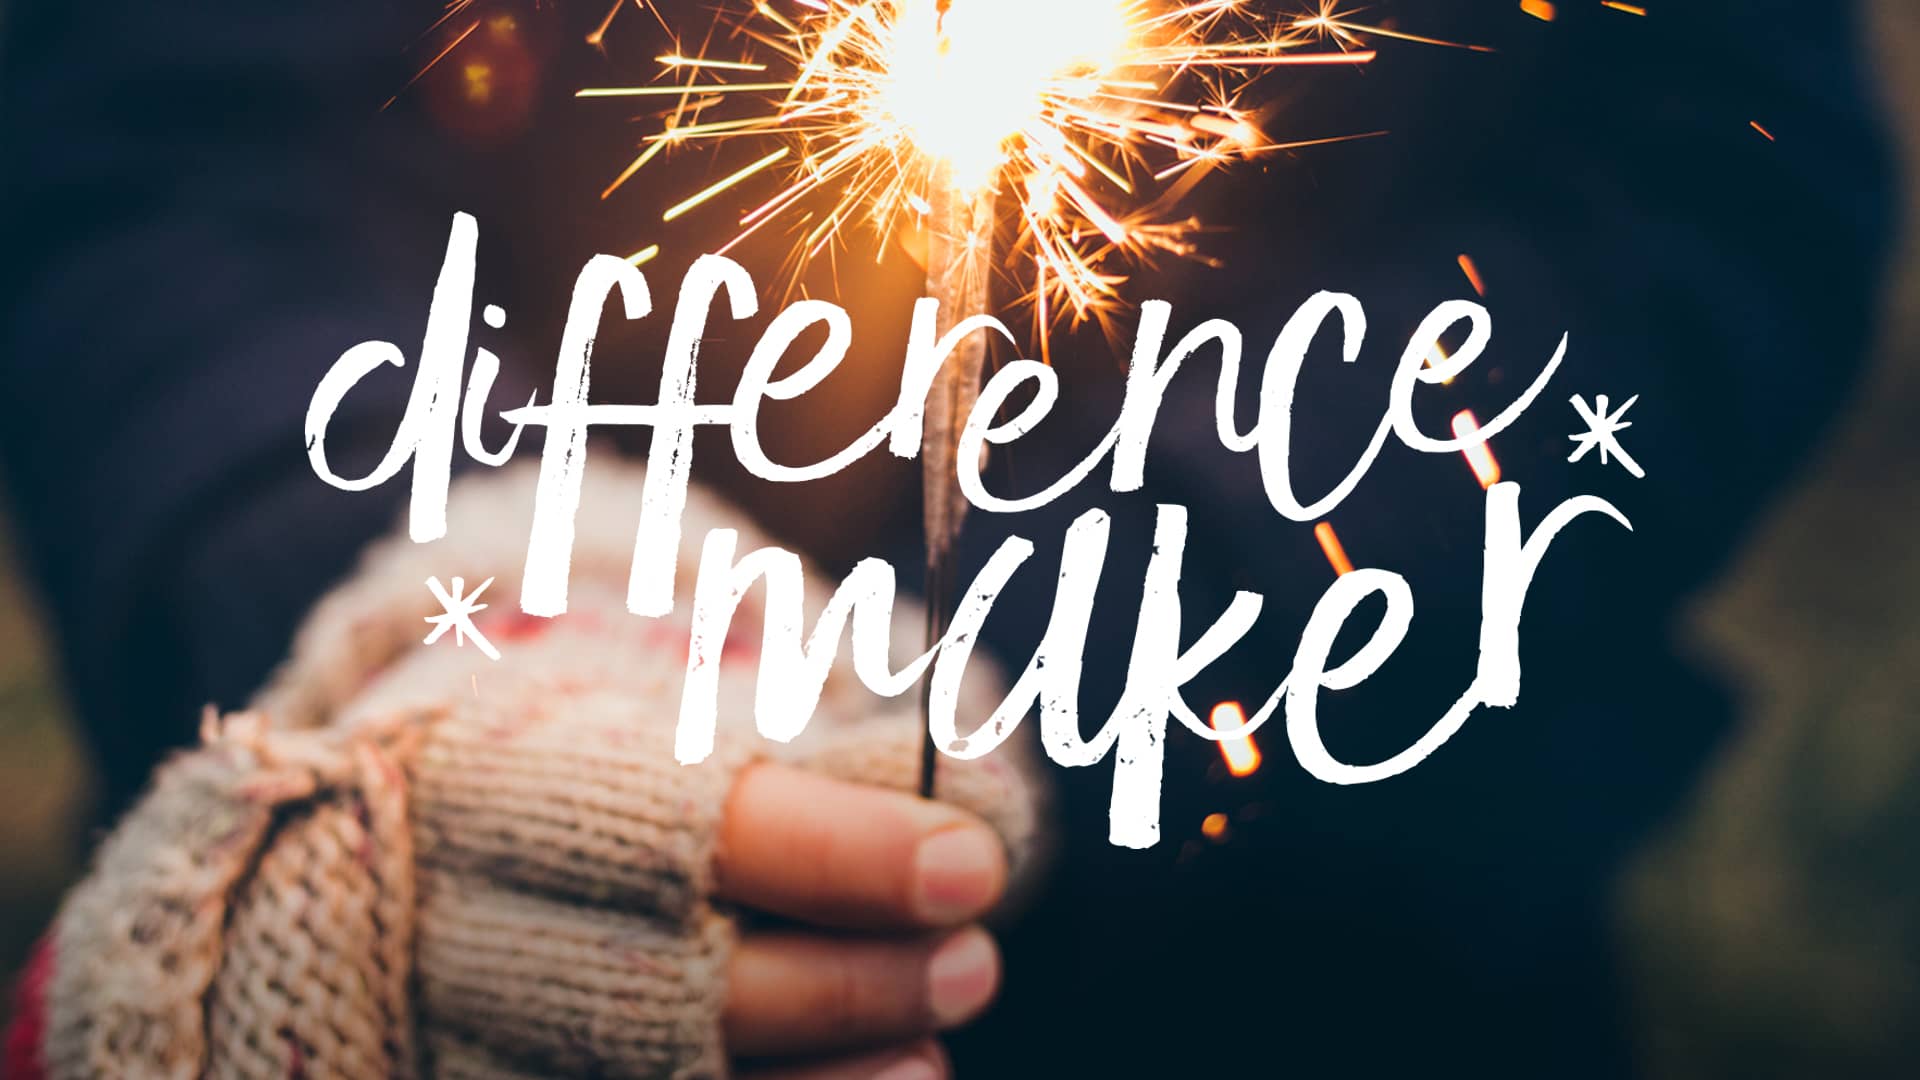 5 Ways To Be A Difference Maker